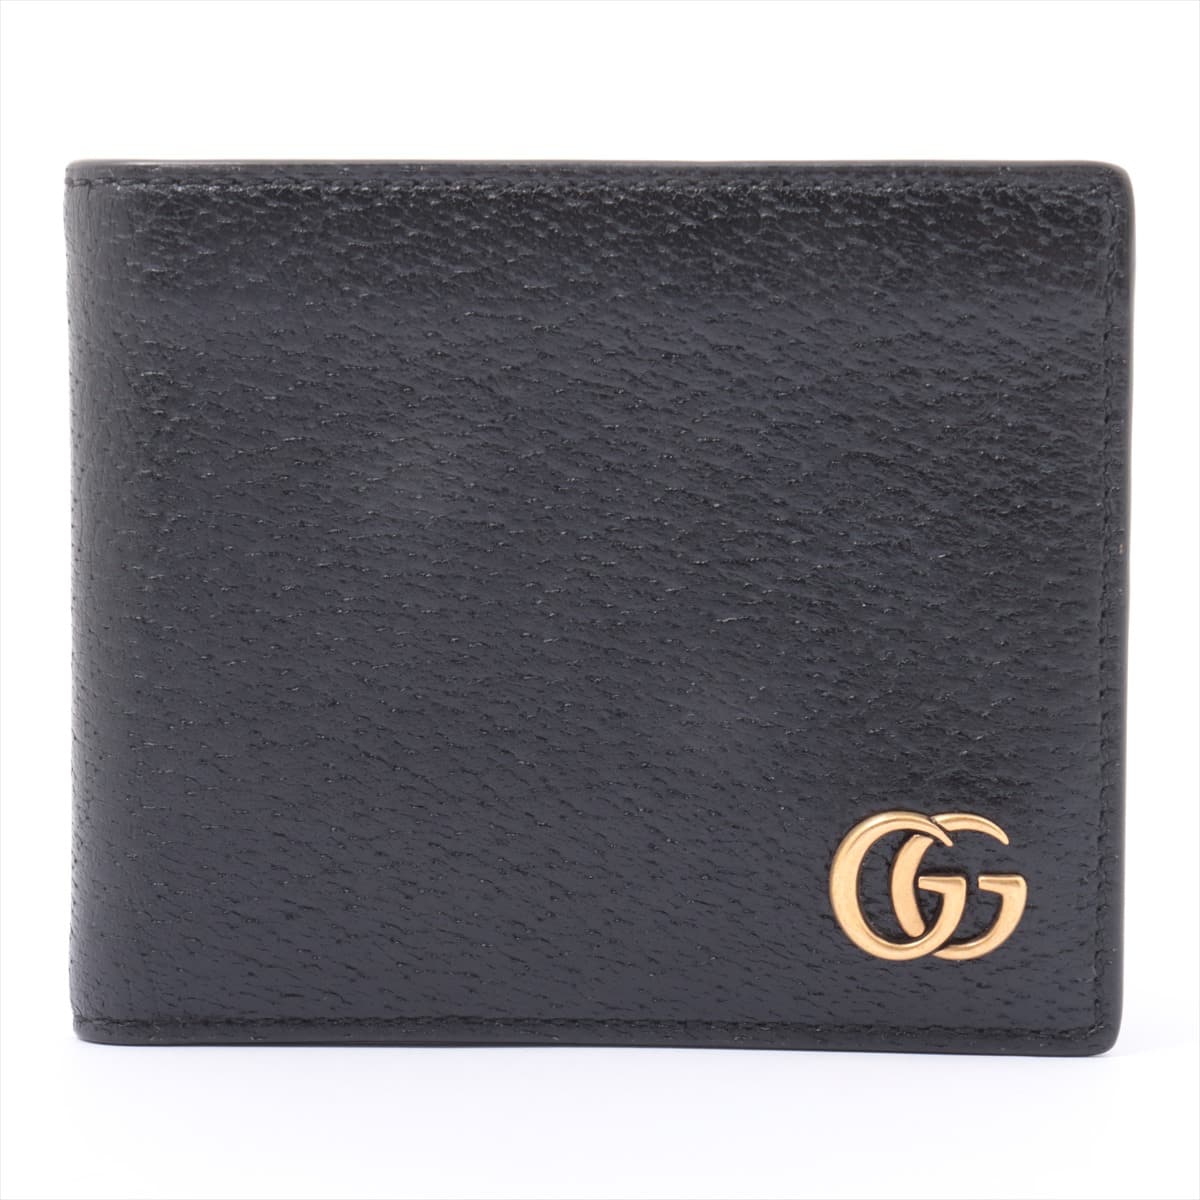 Gucci GG Marmont 473960 Leather Wallet Black